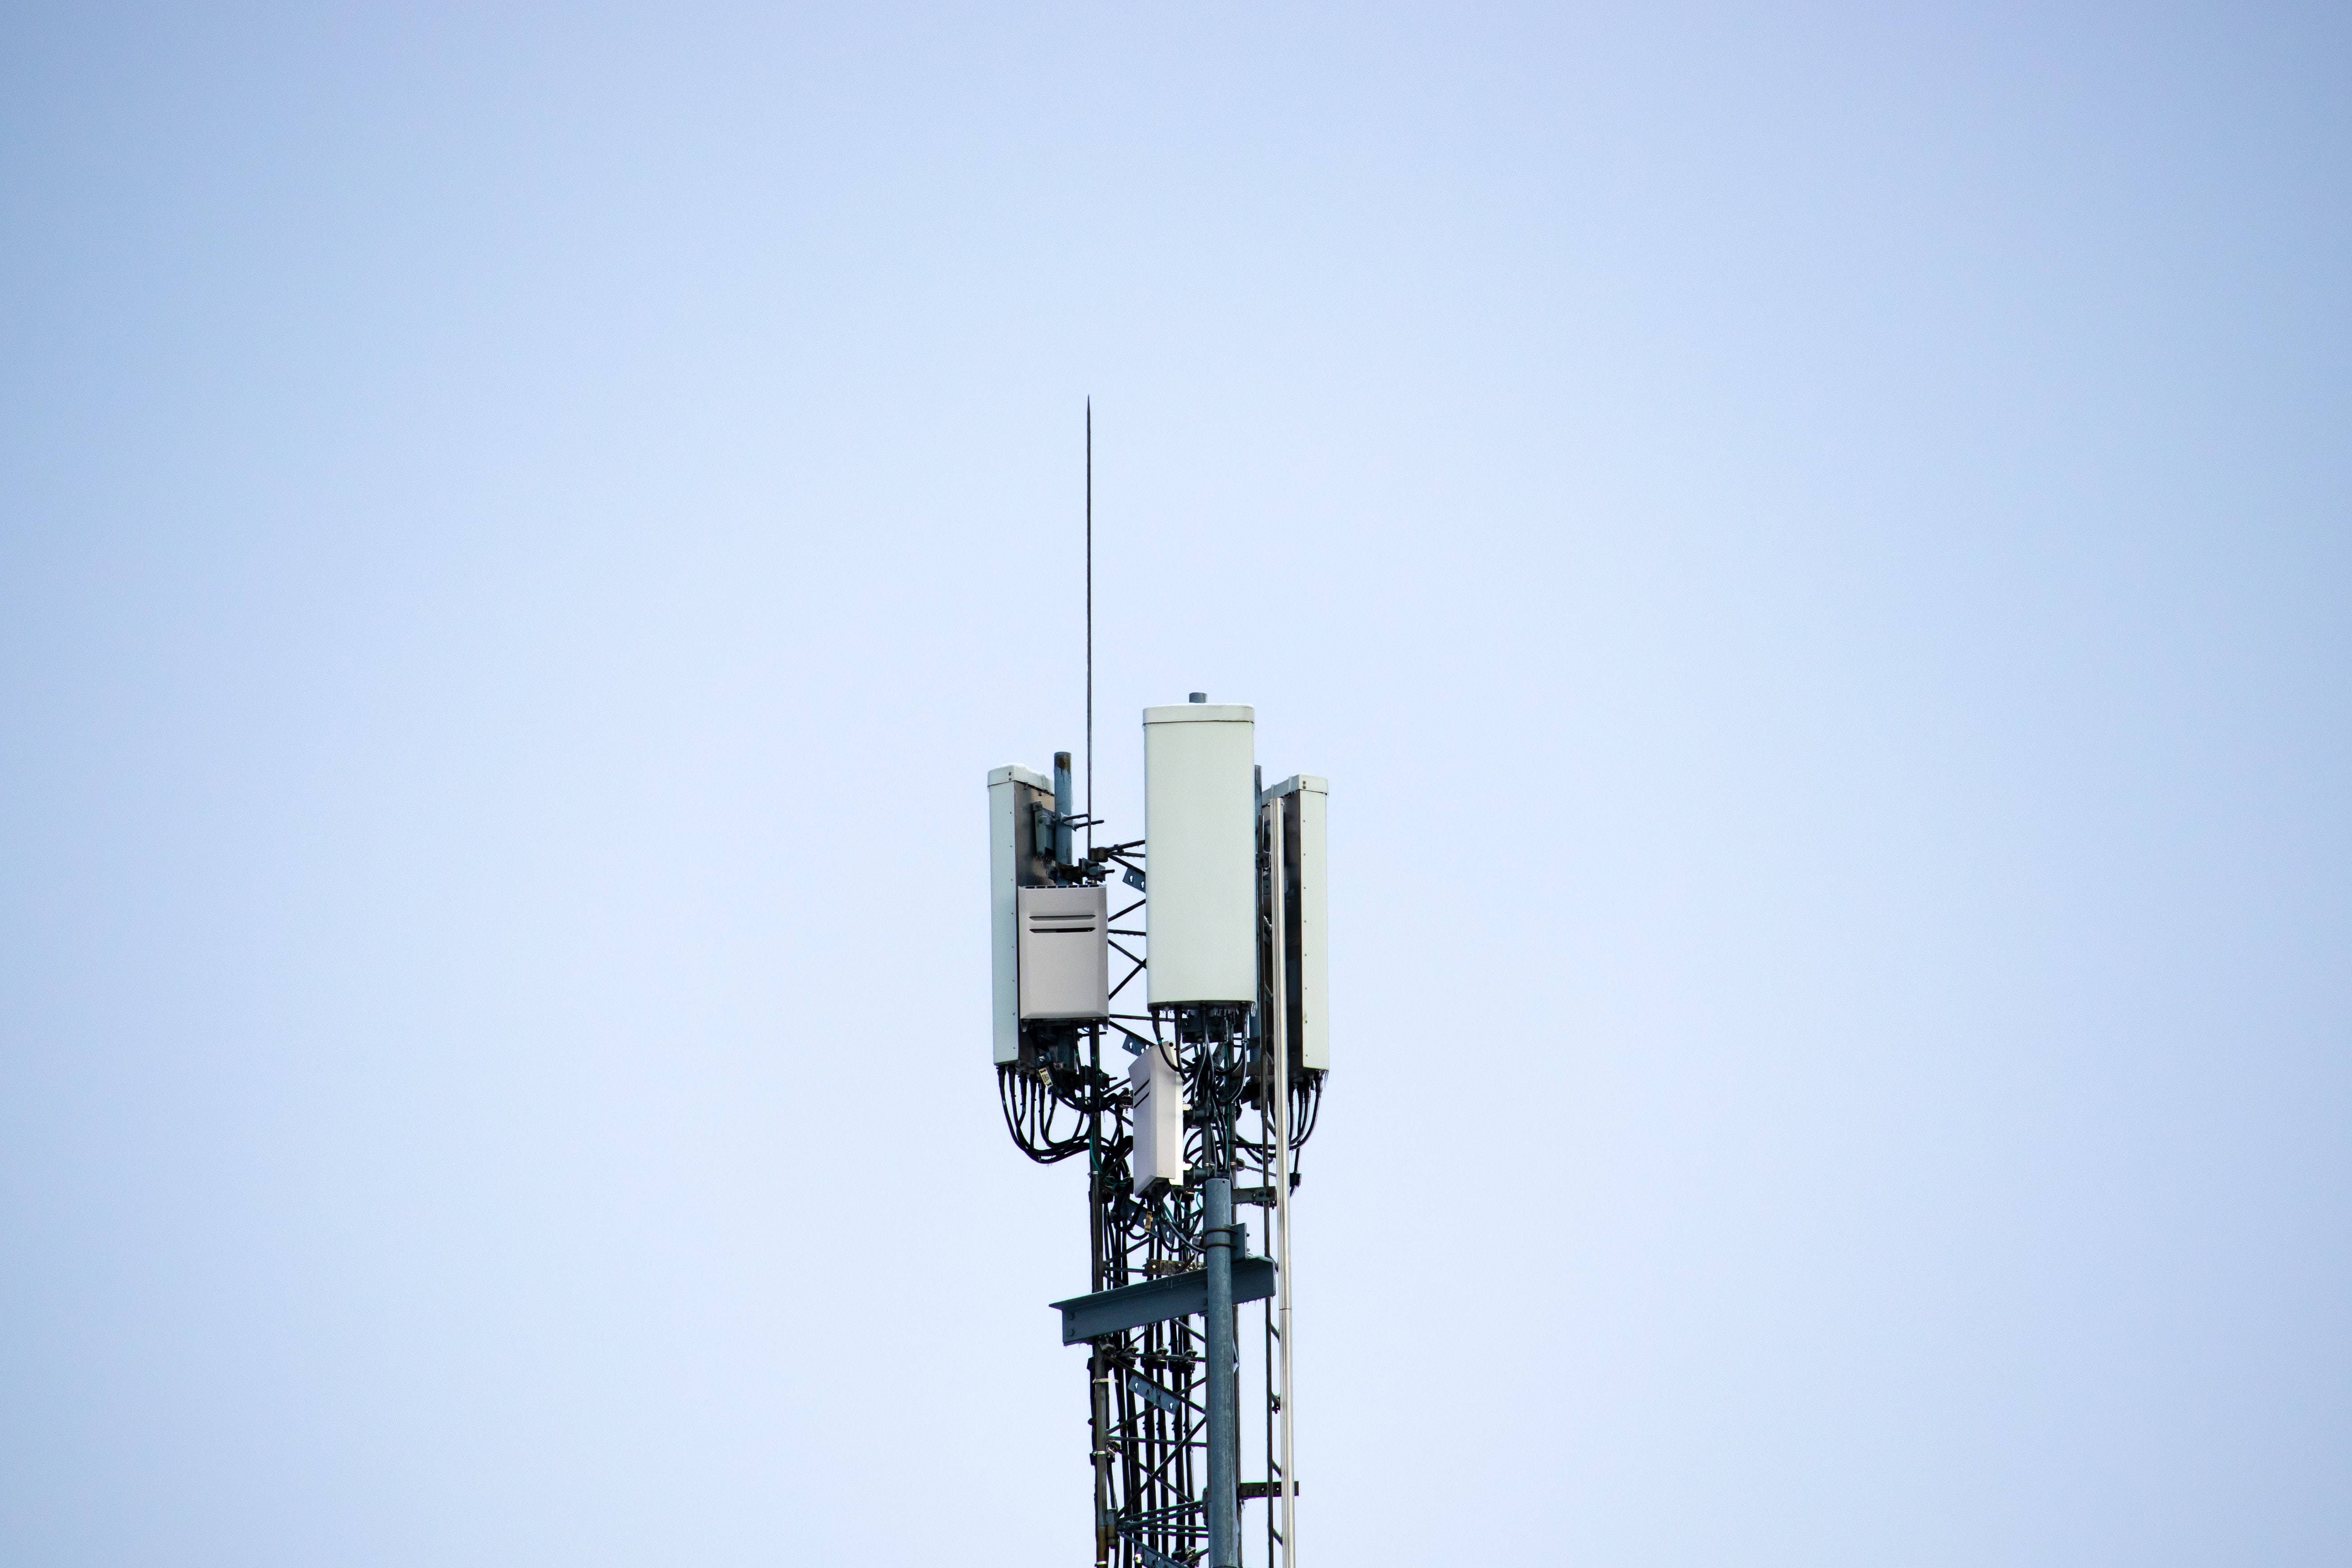 5G Is Coming to Louisiana, but How Soon?